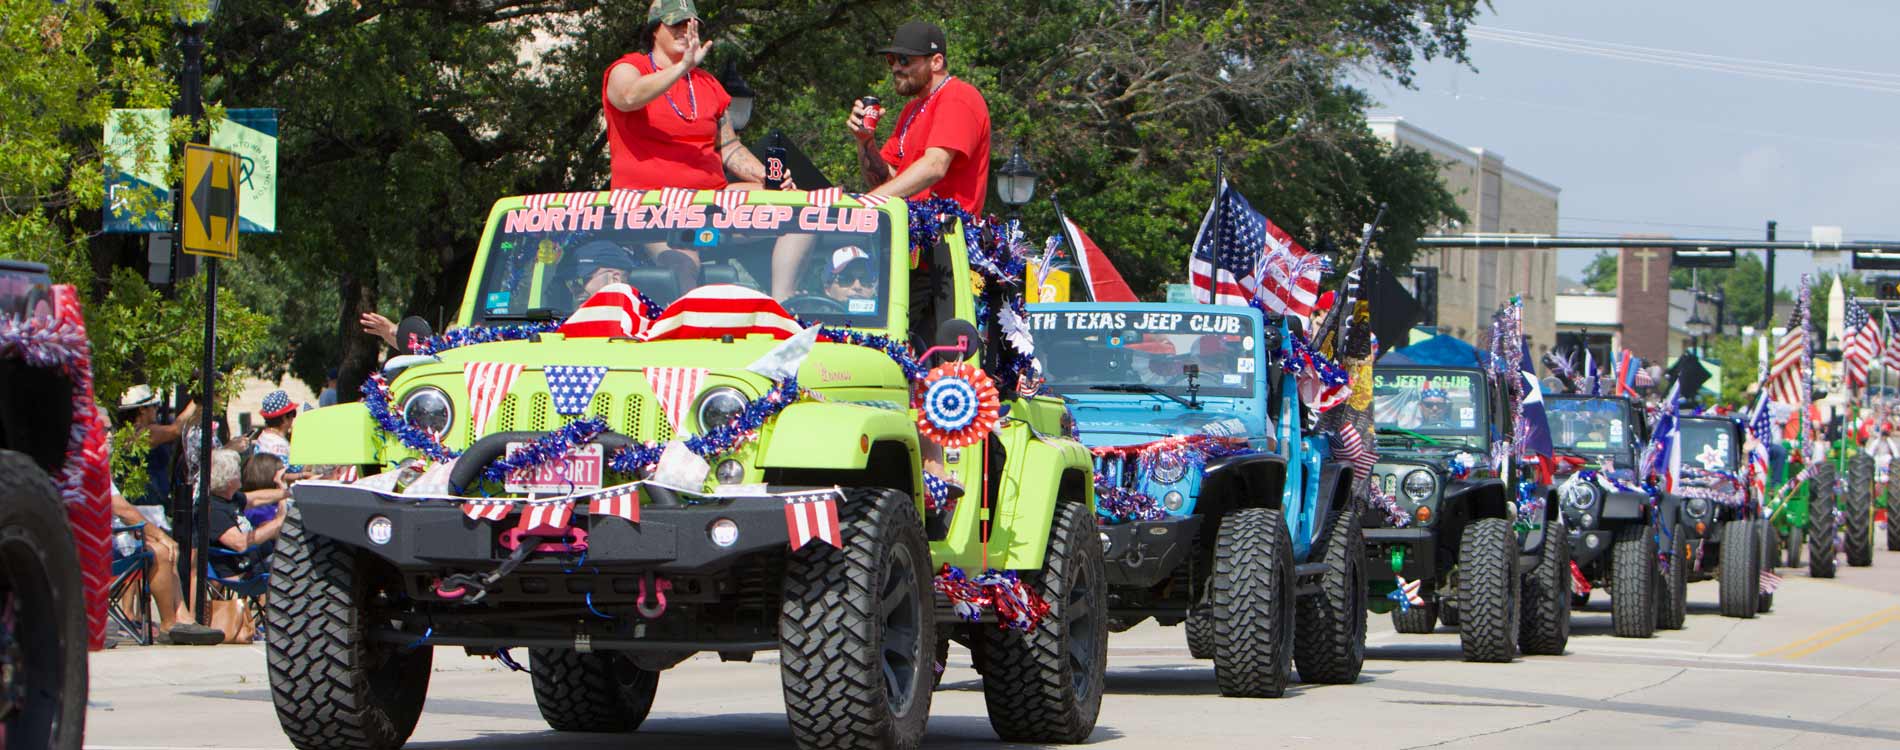 Jeep owners group in parade